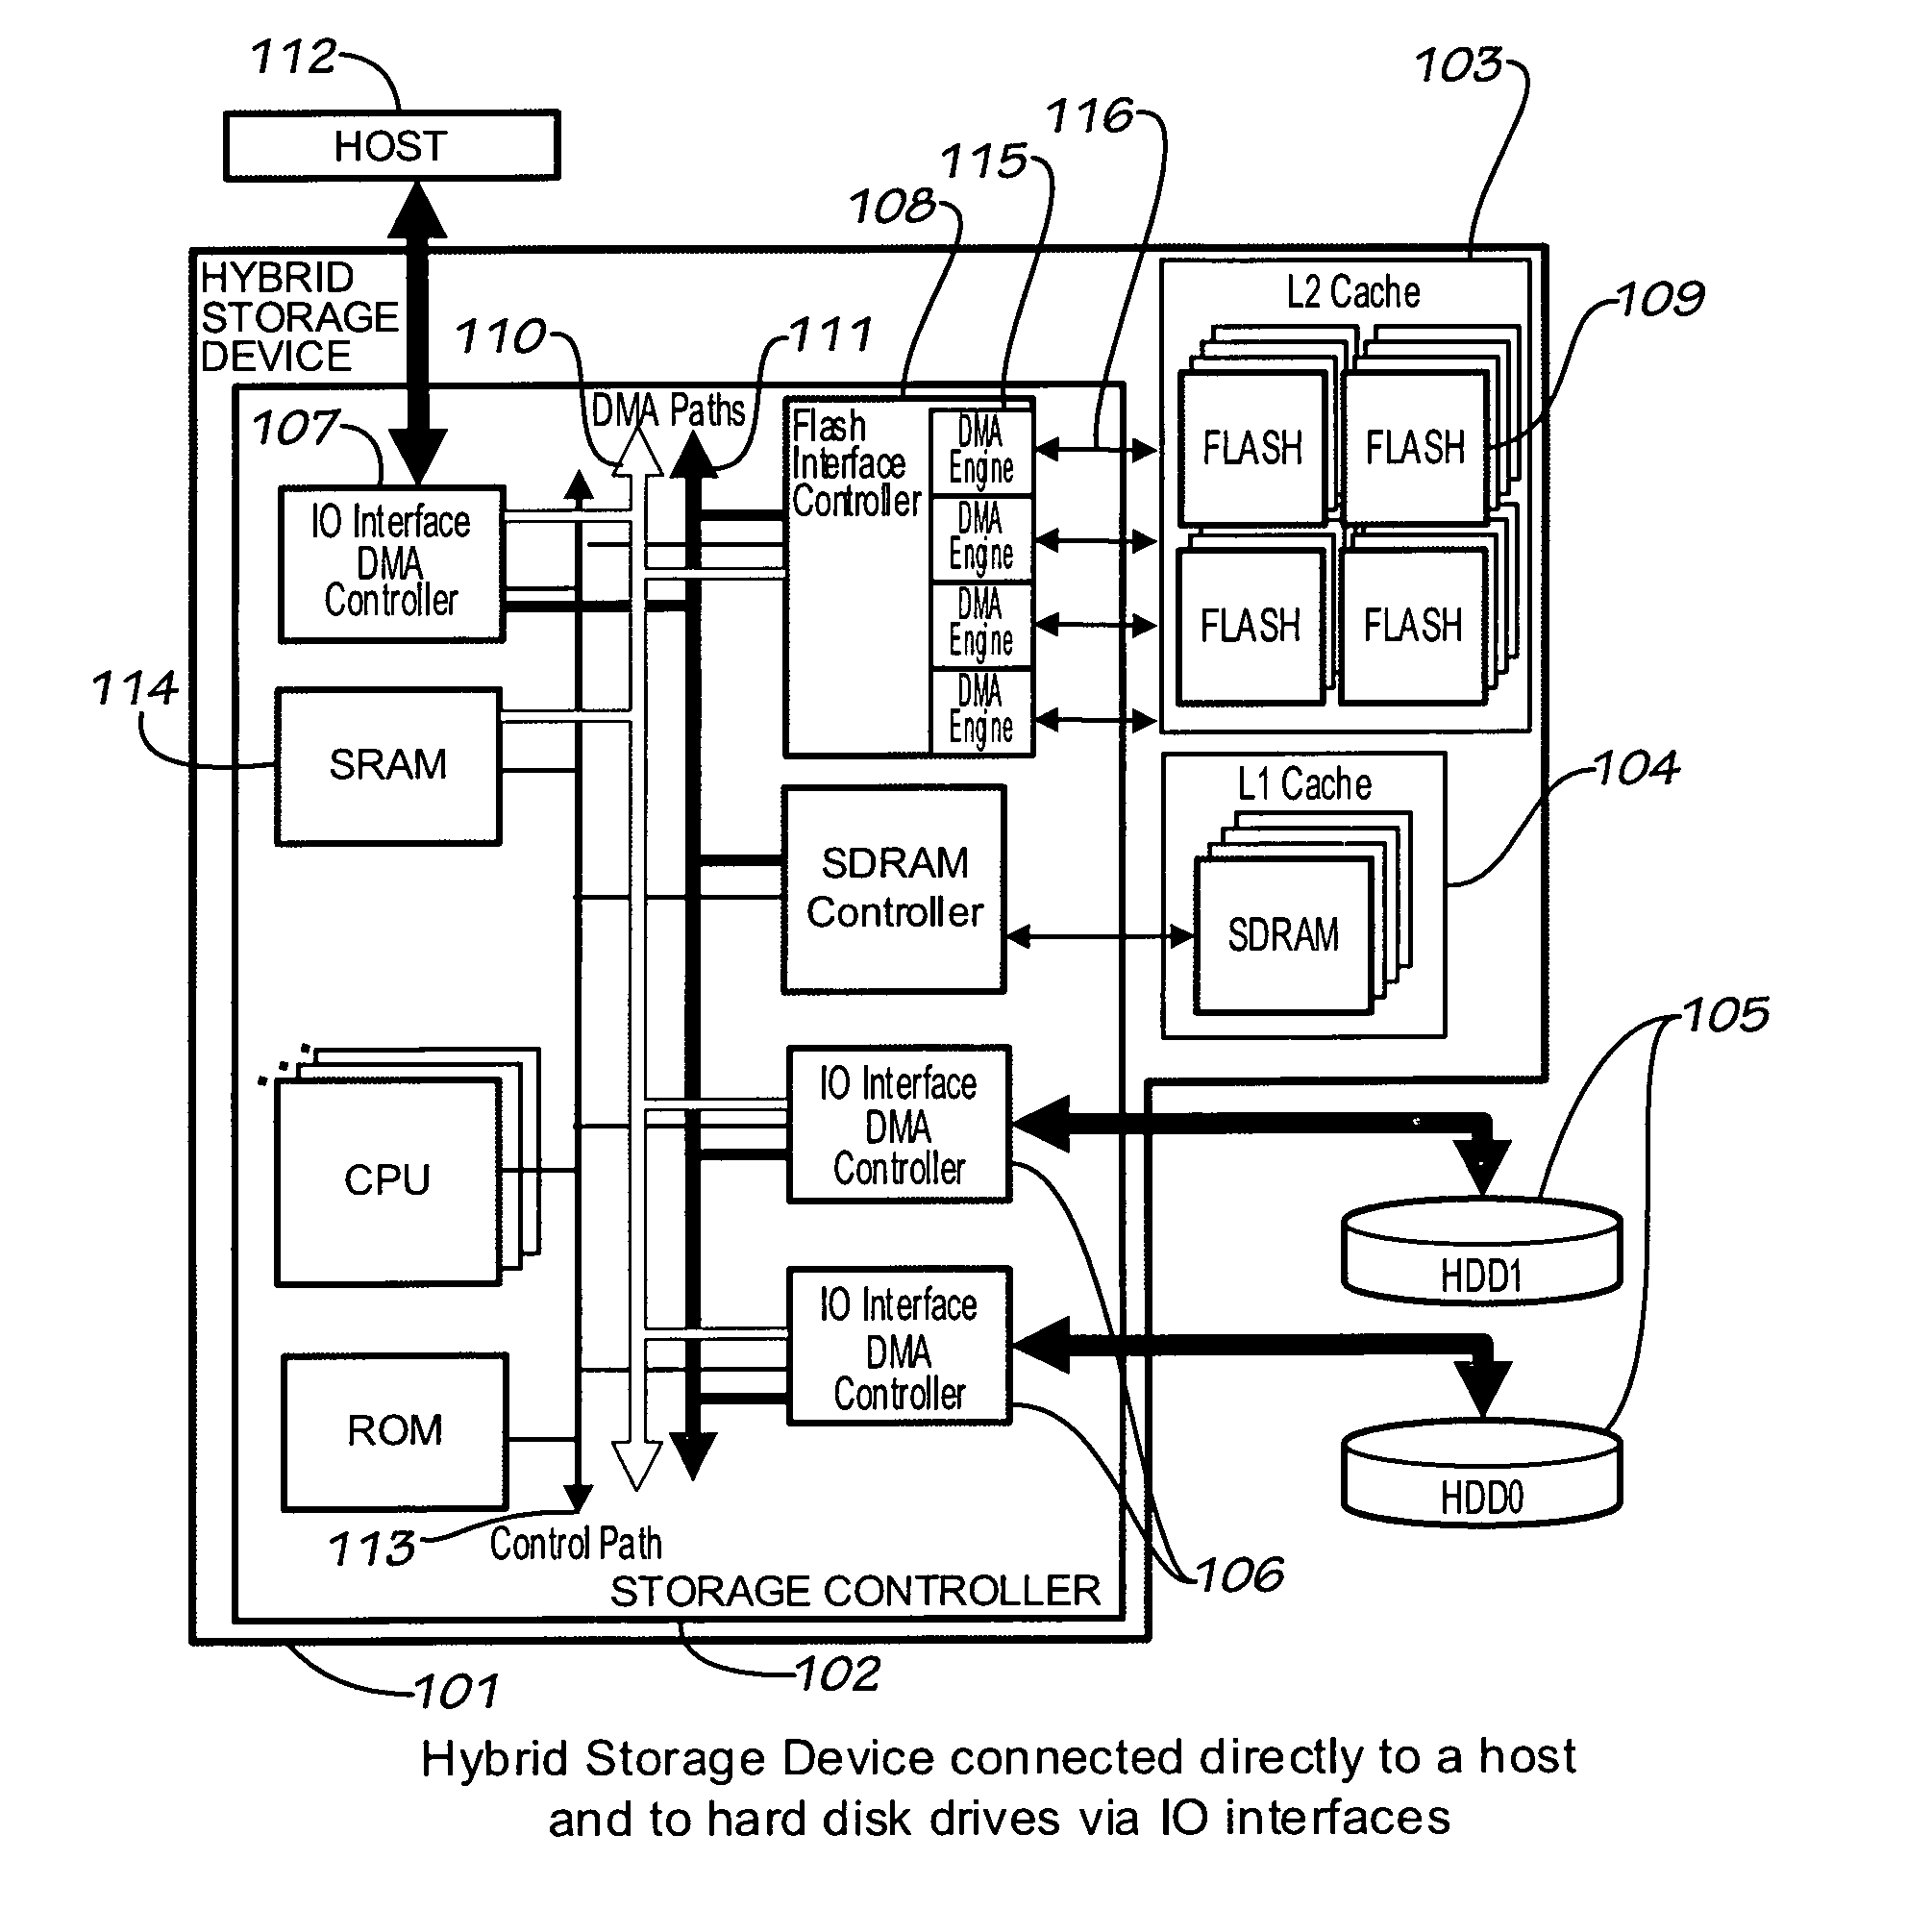 Multi-leveled cache management in a hybrid storage system